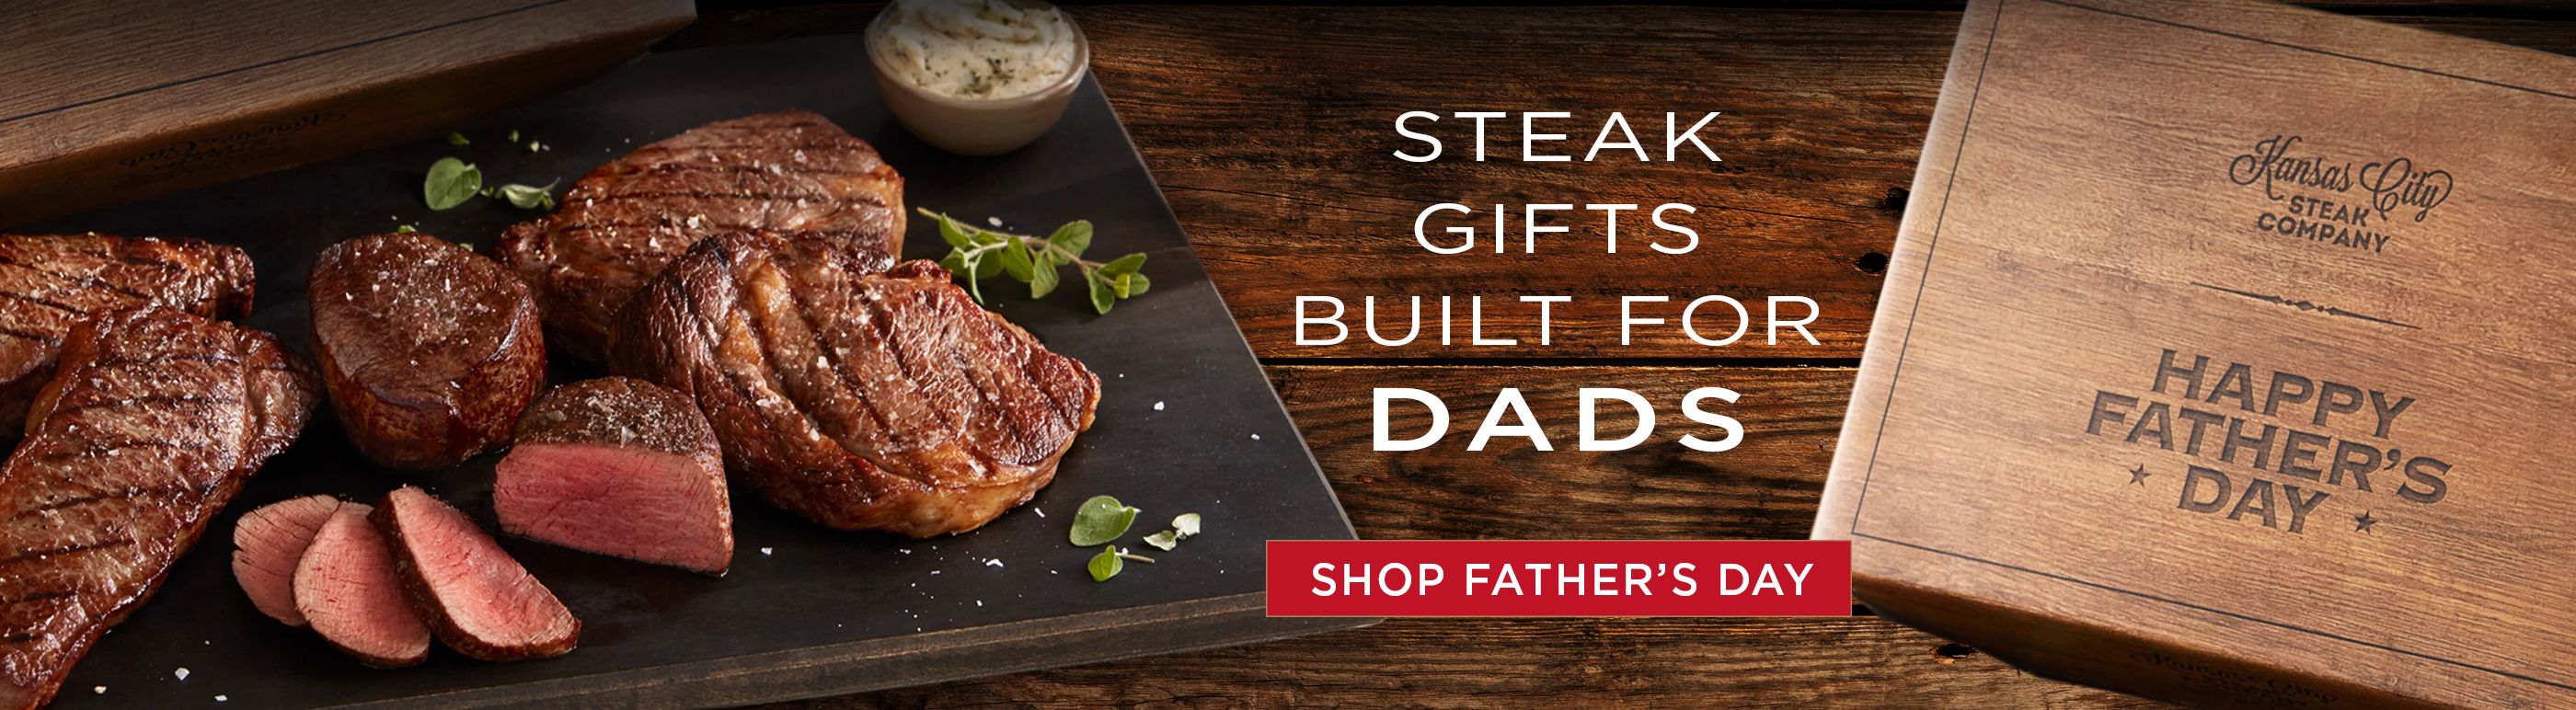 Steak gifts built for Dads.